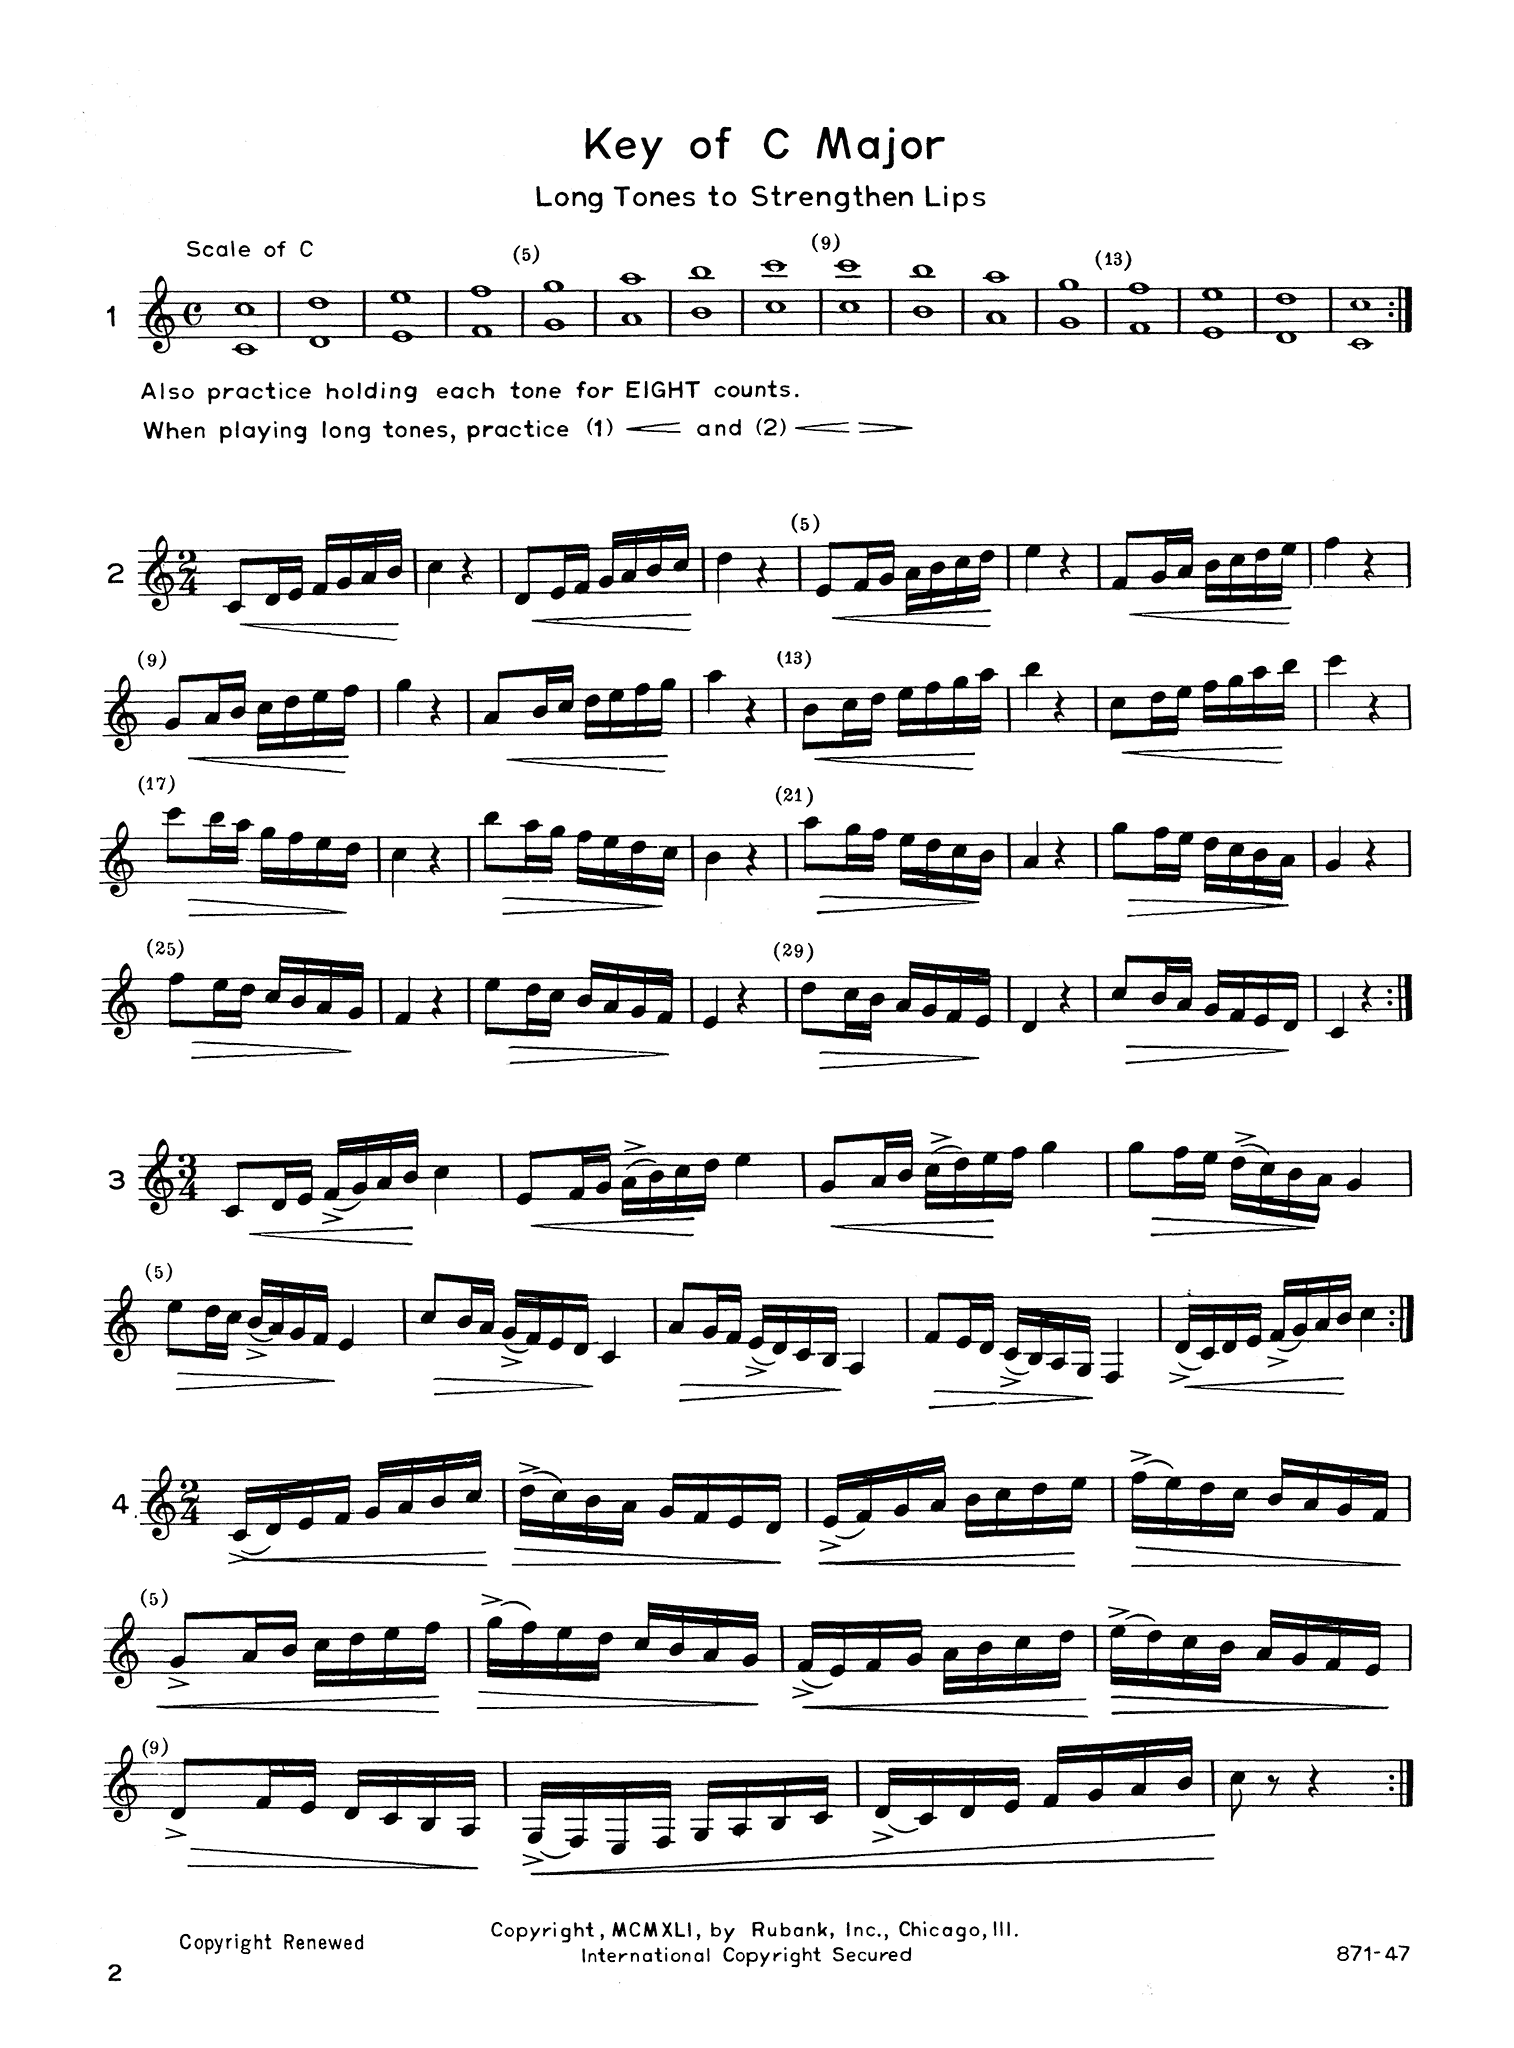 Parès Daily Exercises & Scales for Clarinet Rubank Page 2